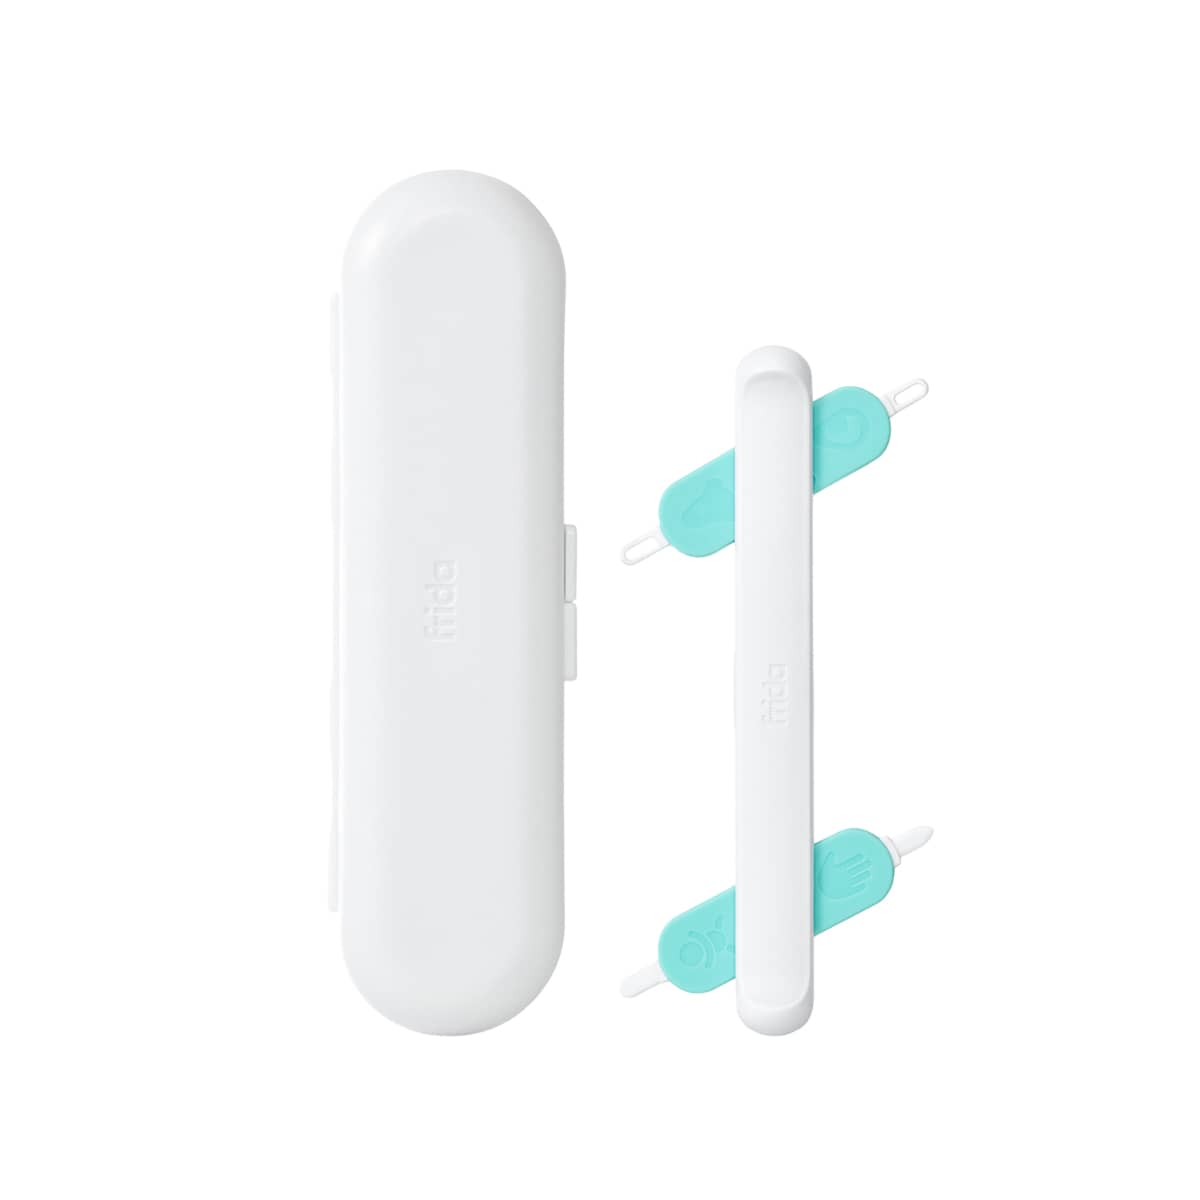 Frida Baby 3-in-1 Nose, Nail + Ear Picker by The Makers of NoseFrida